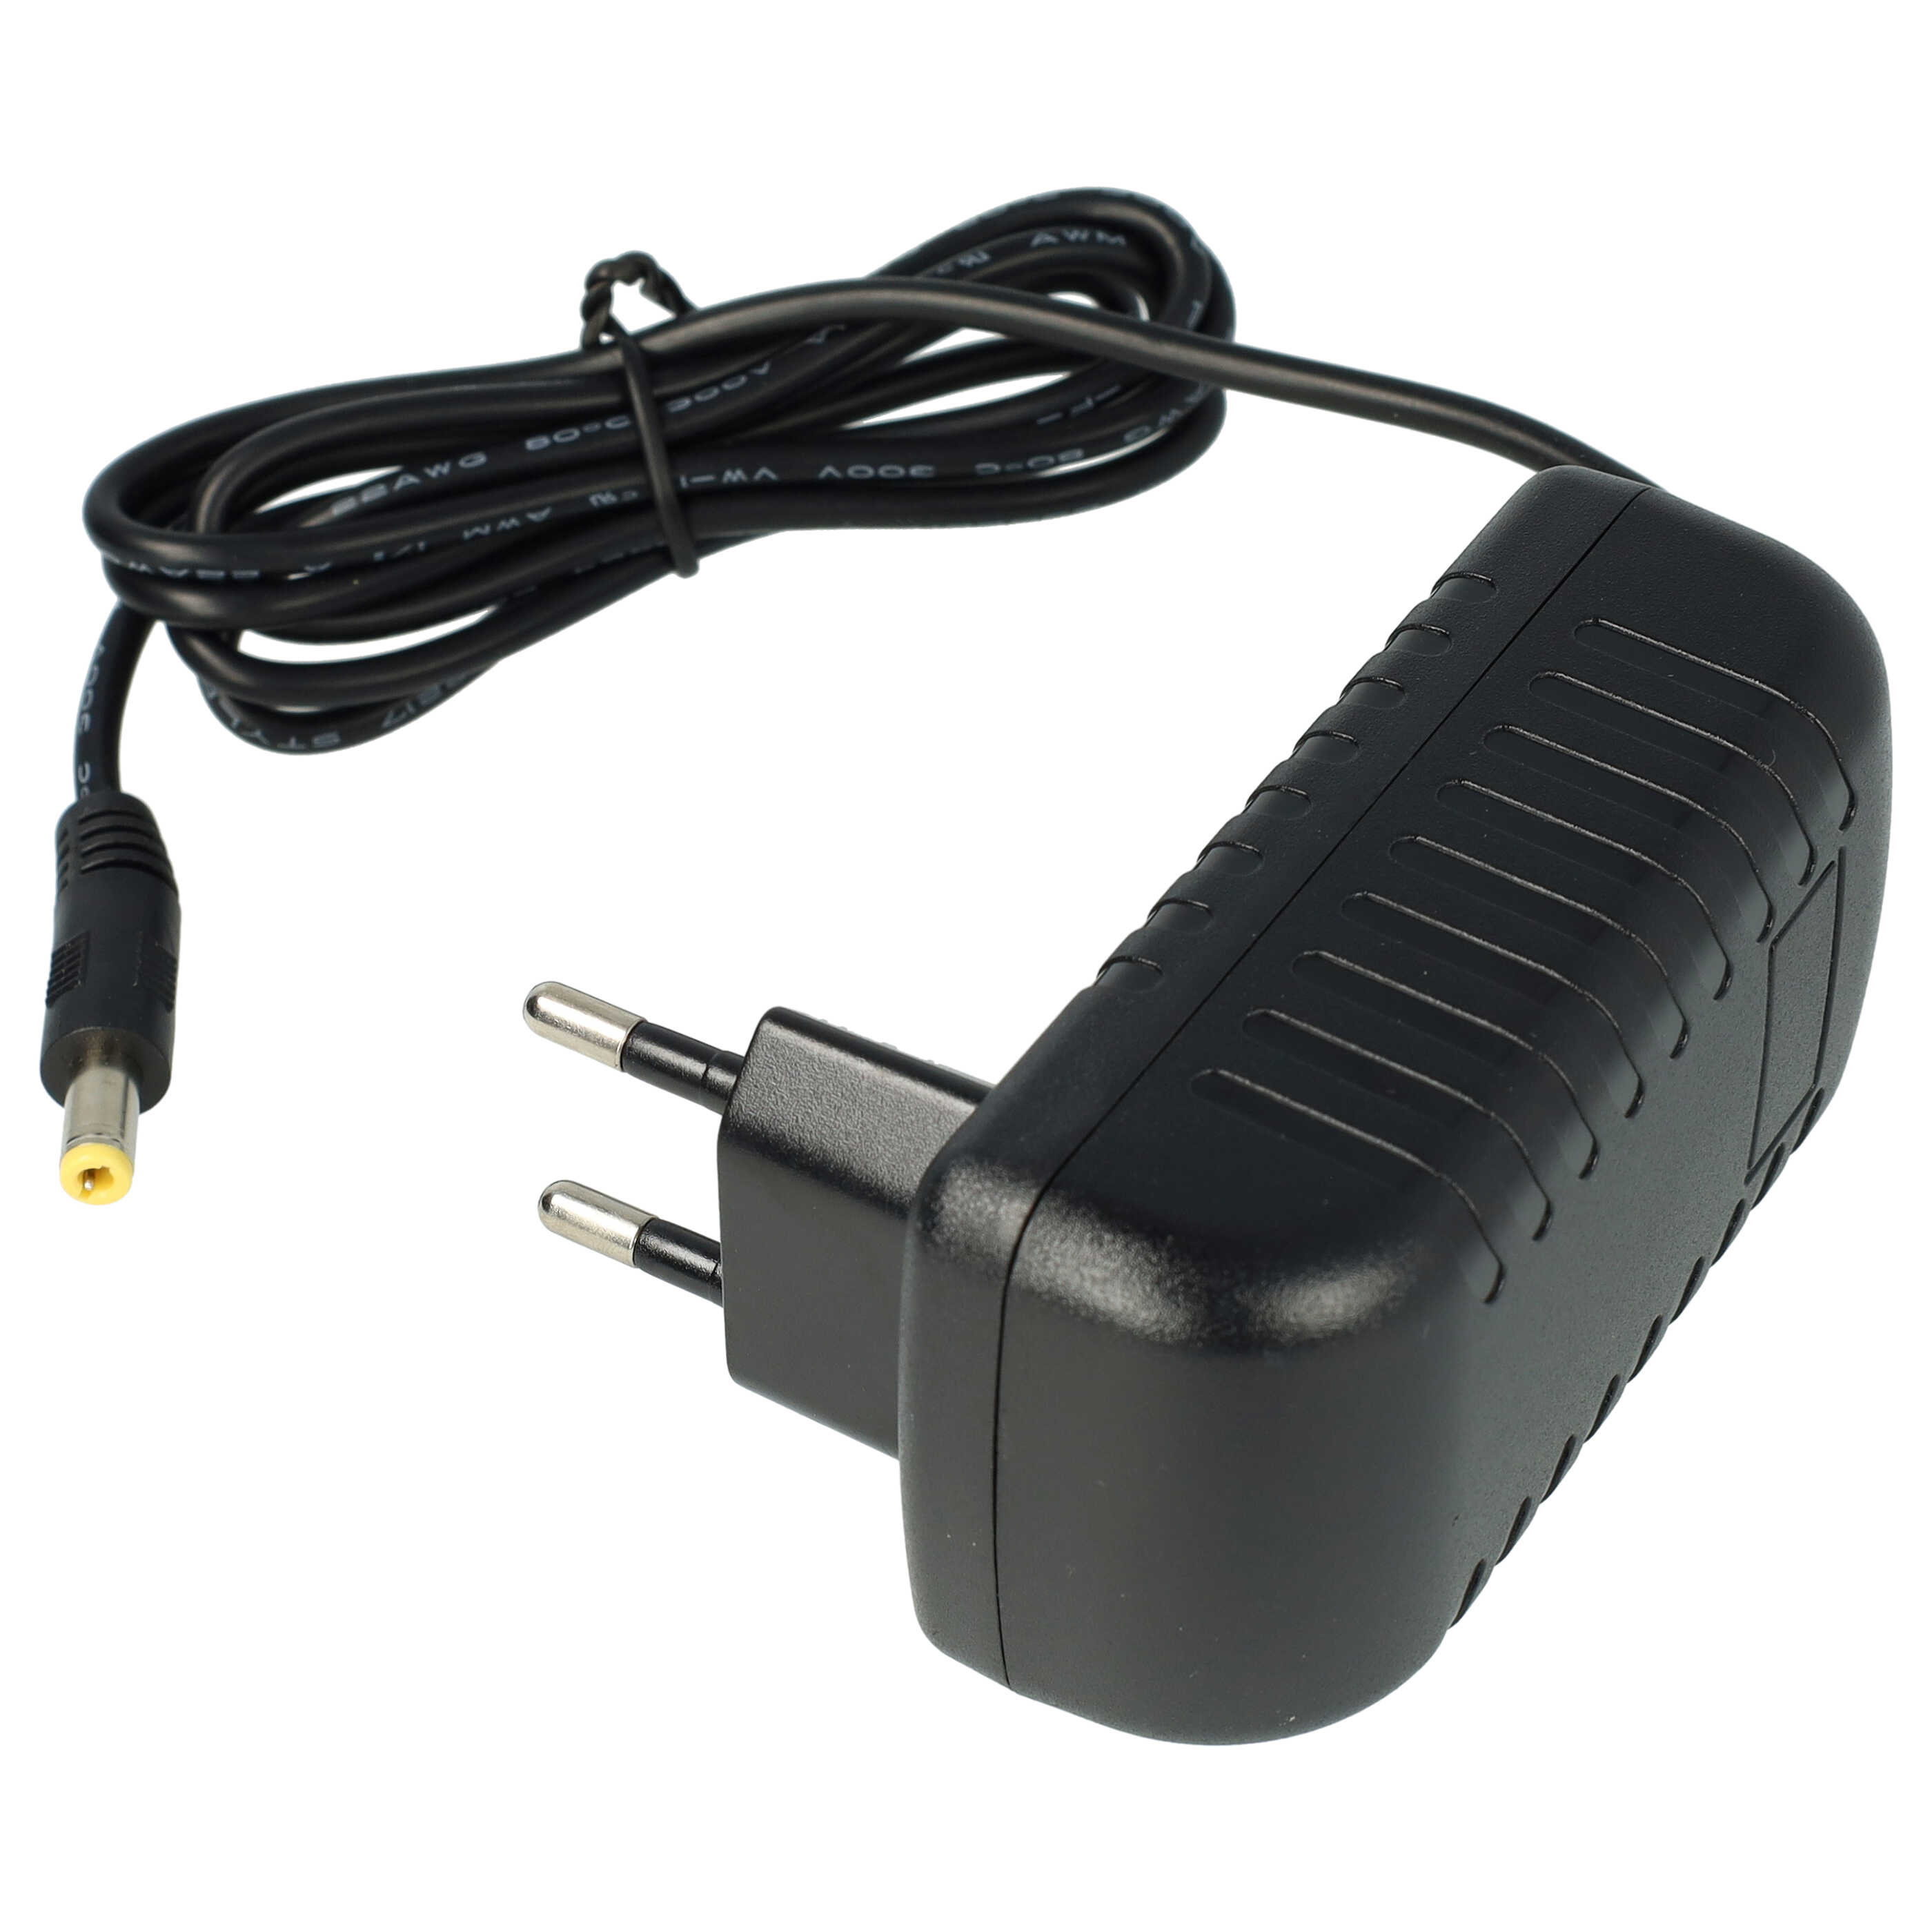 Mains Power Adapter with 5.5 x 2.5 mm Plug suitable for various Electric Devices - 18 V, 2 A